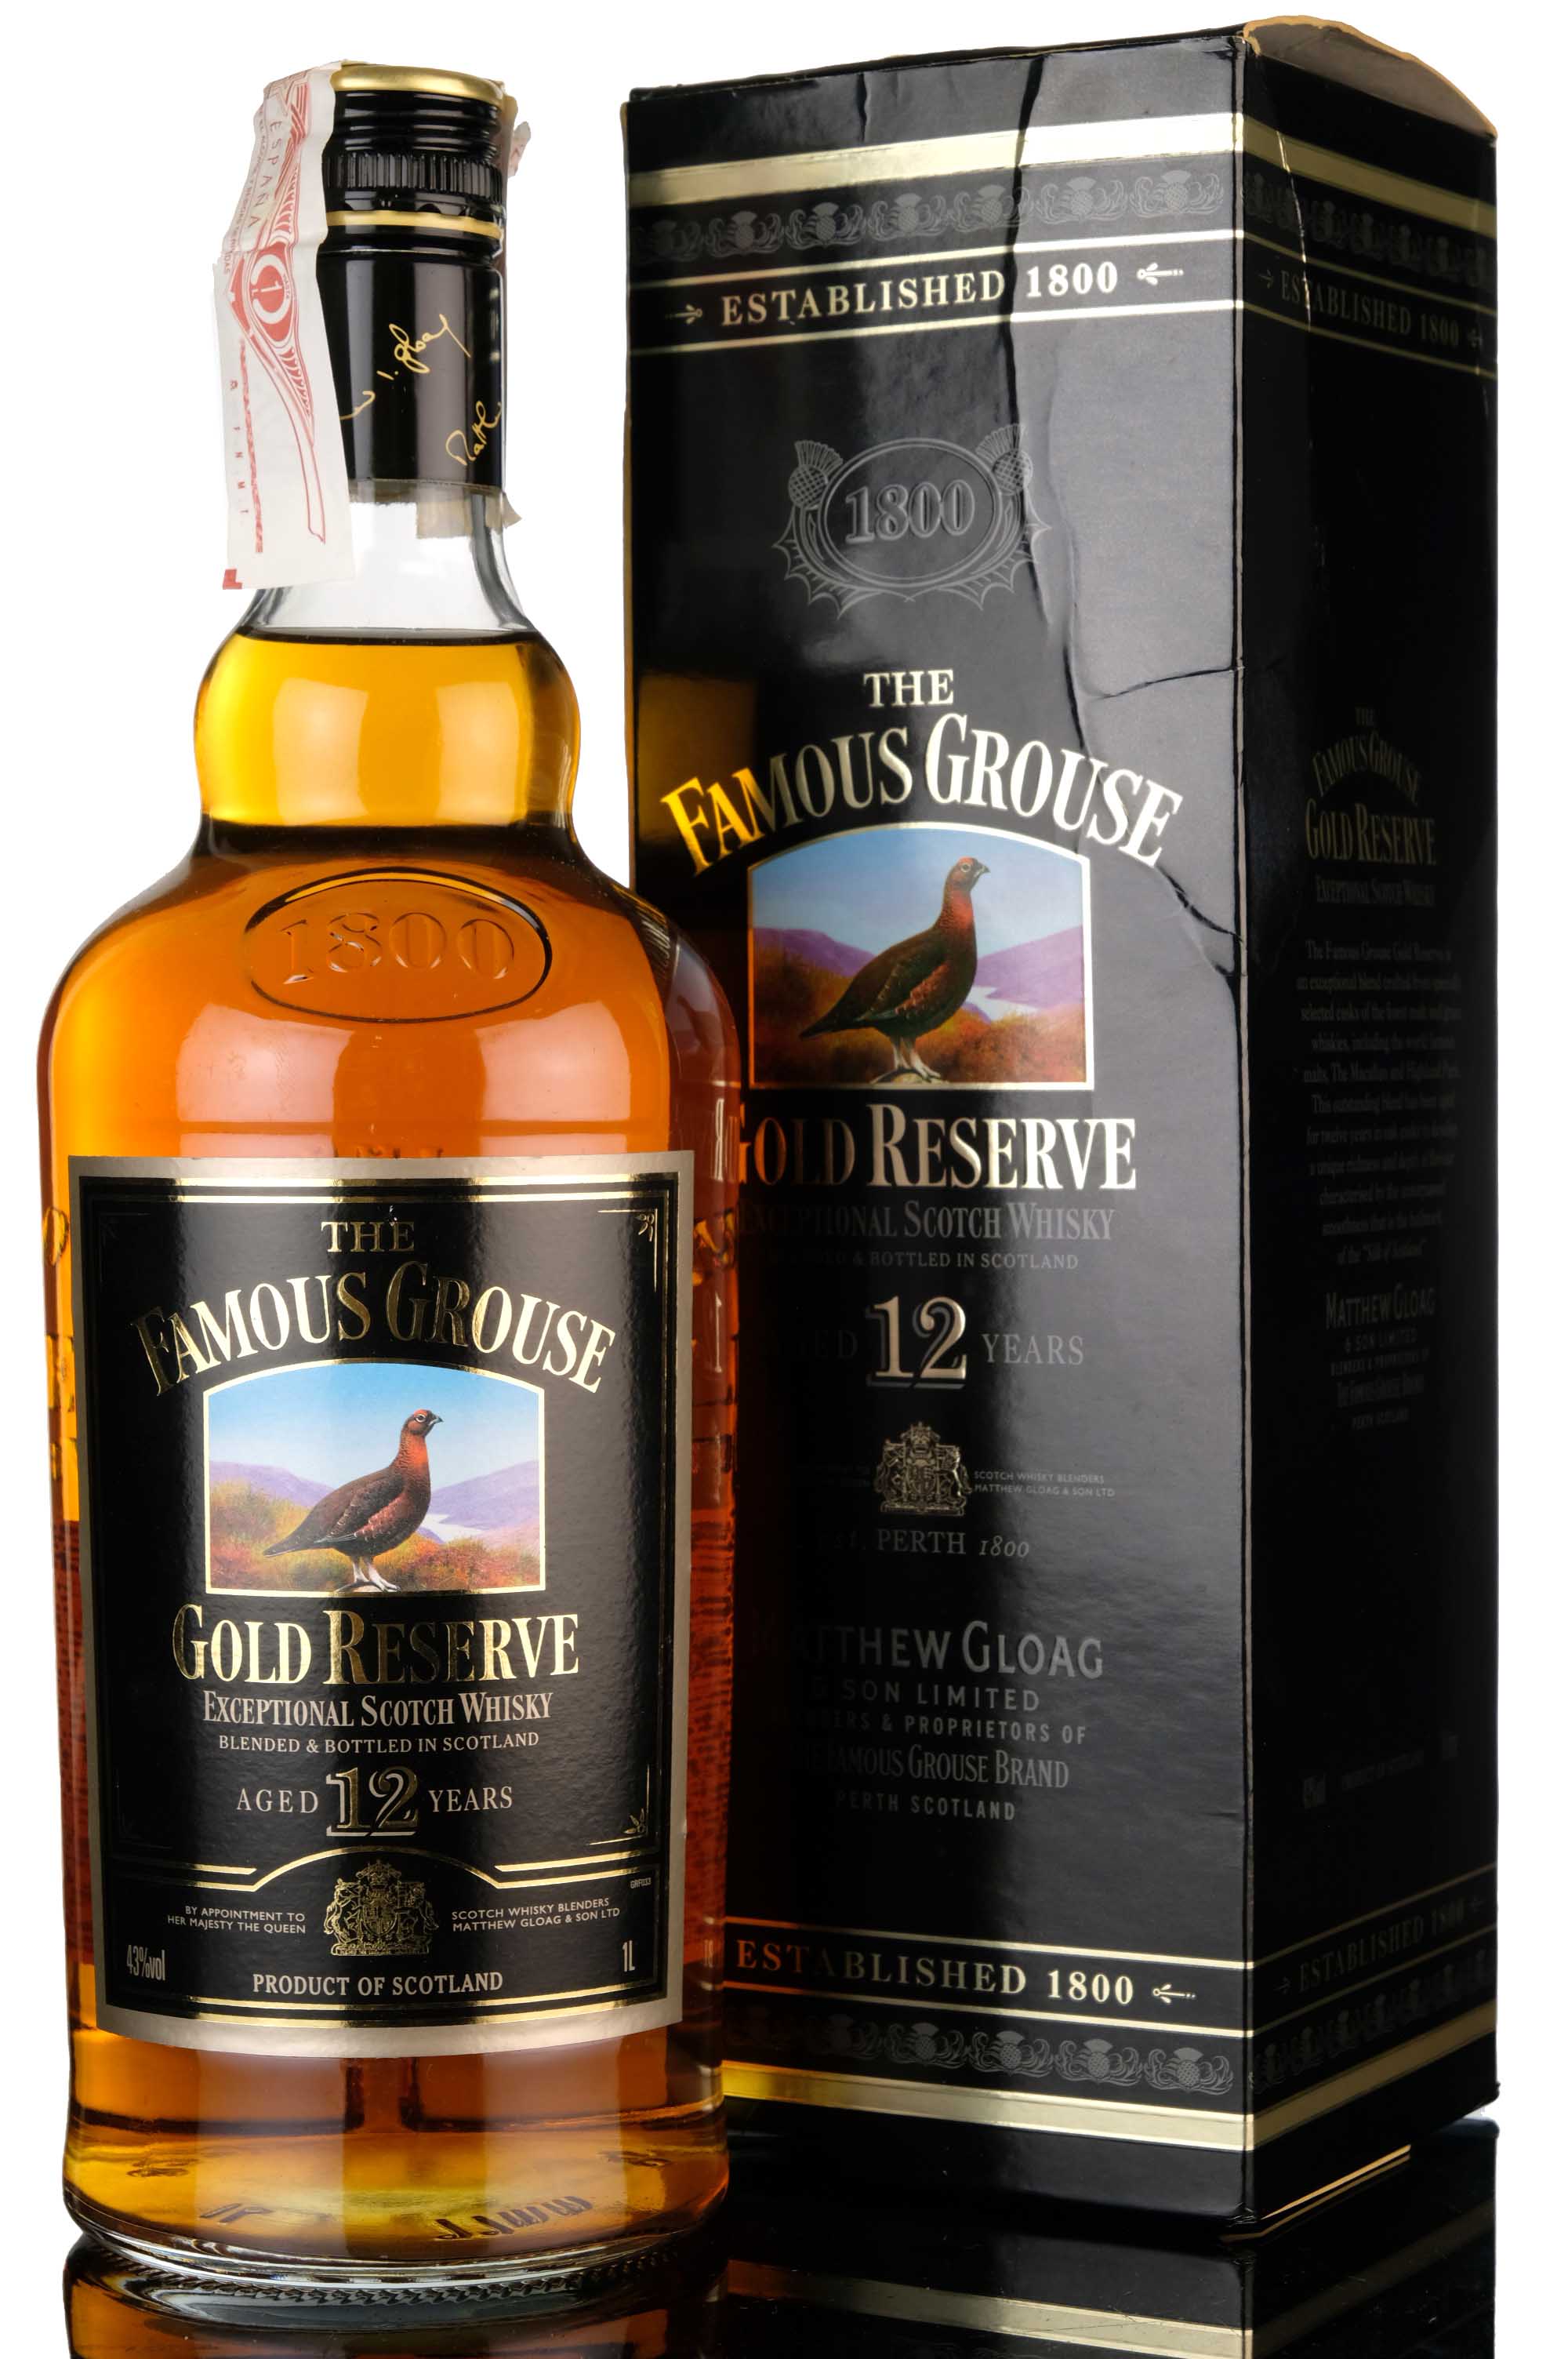 Famous Grouse 12 Year Old - Gold Reserve - 1 Litre